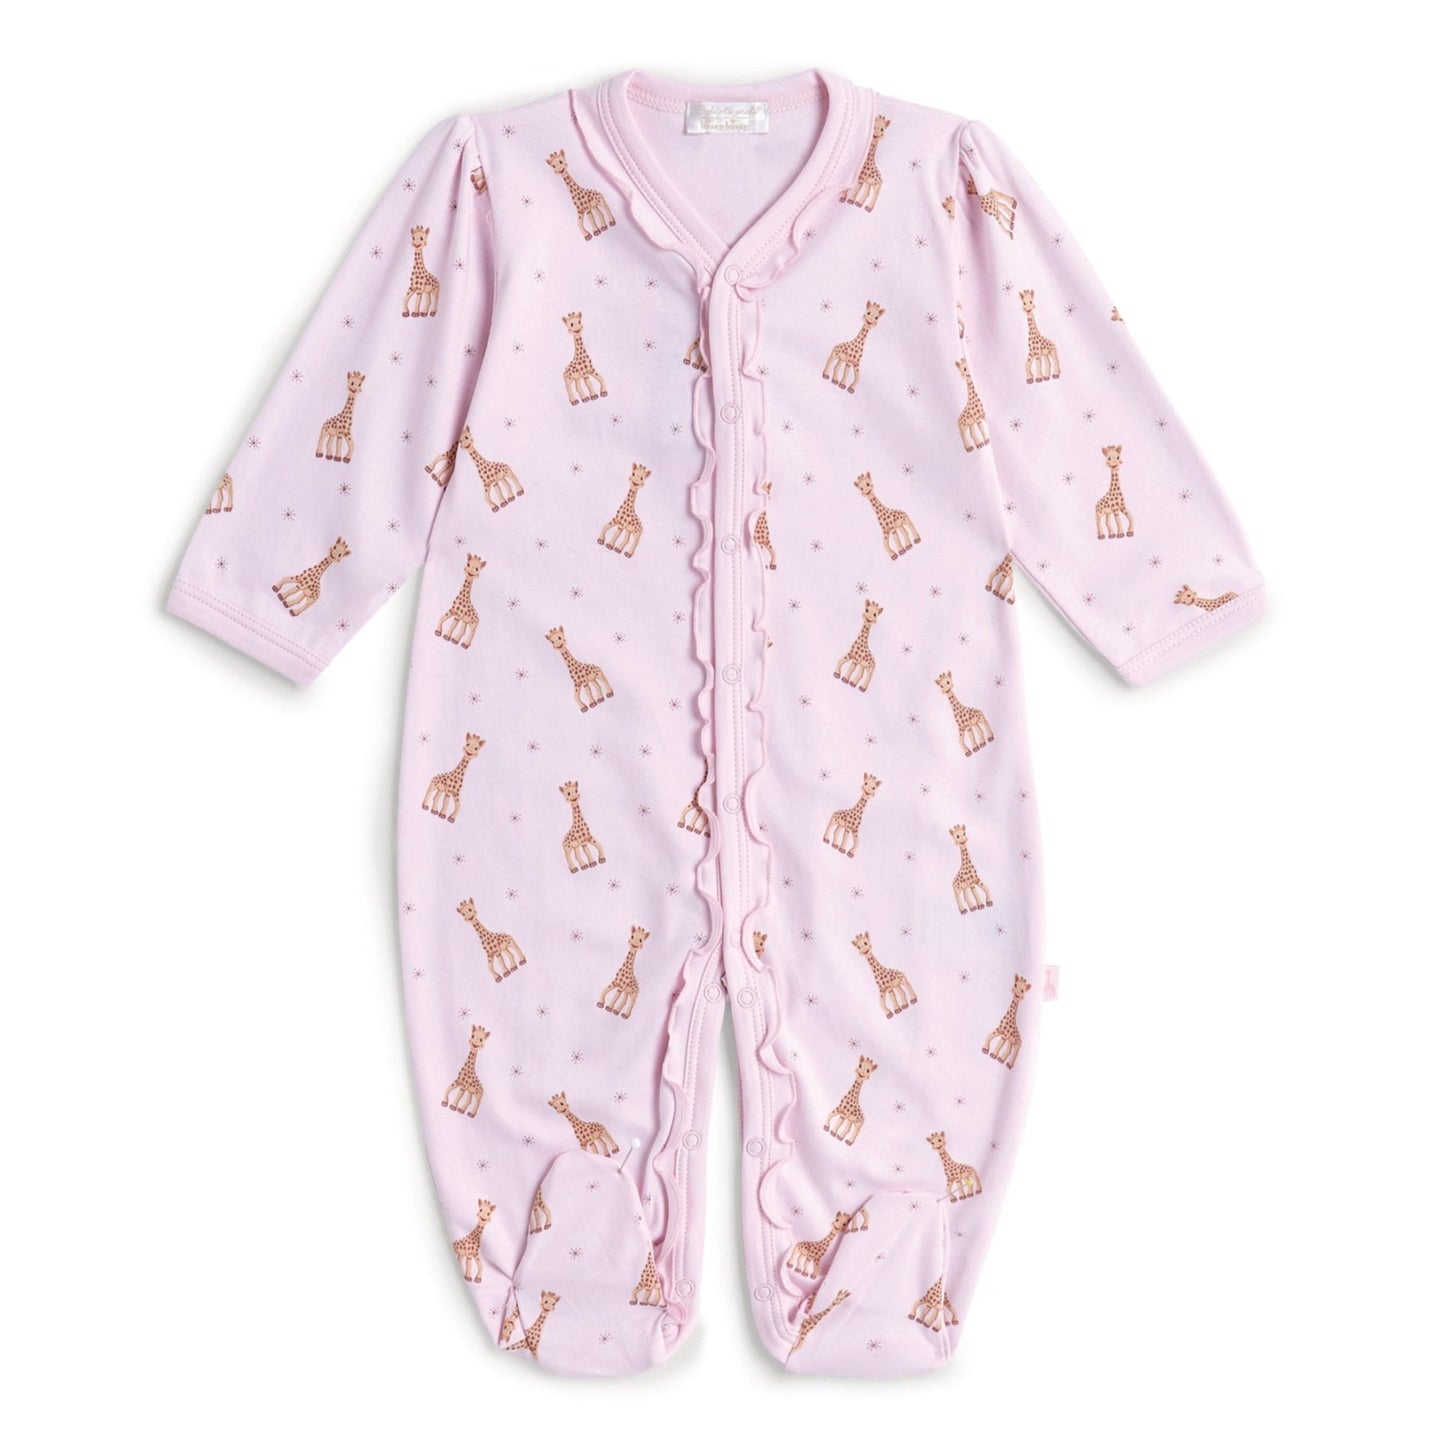 Pink prima cotton baby sleepsuit with Sophie La Girafe design and a frill